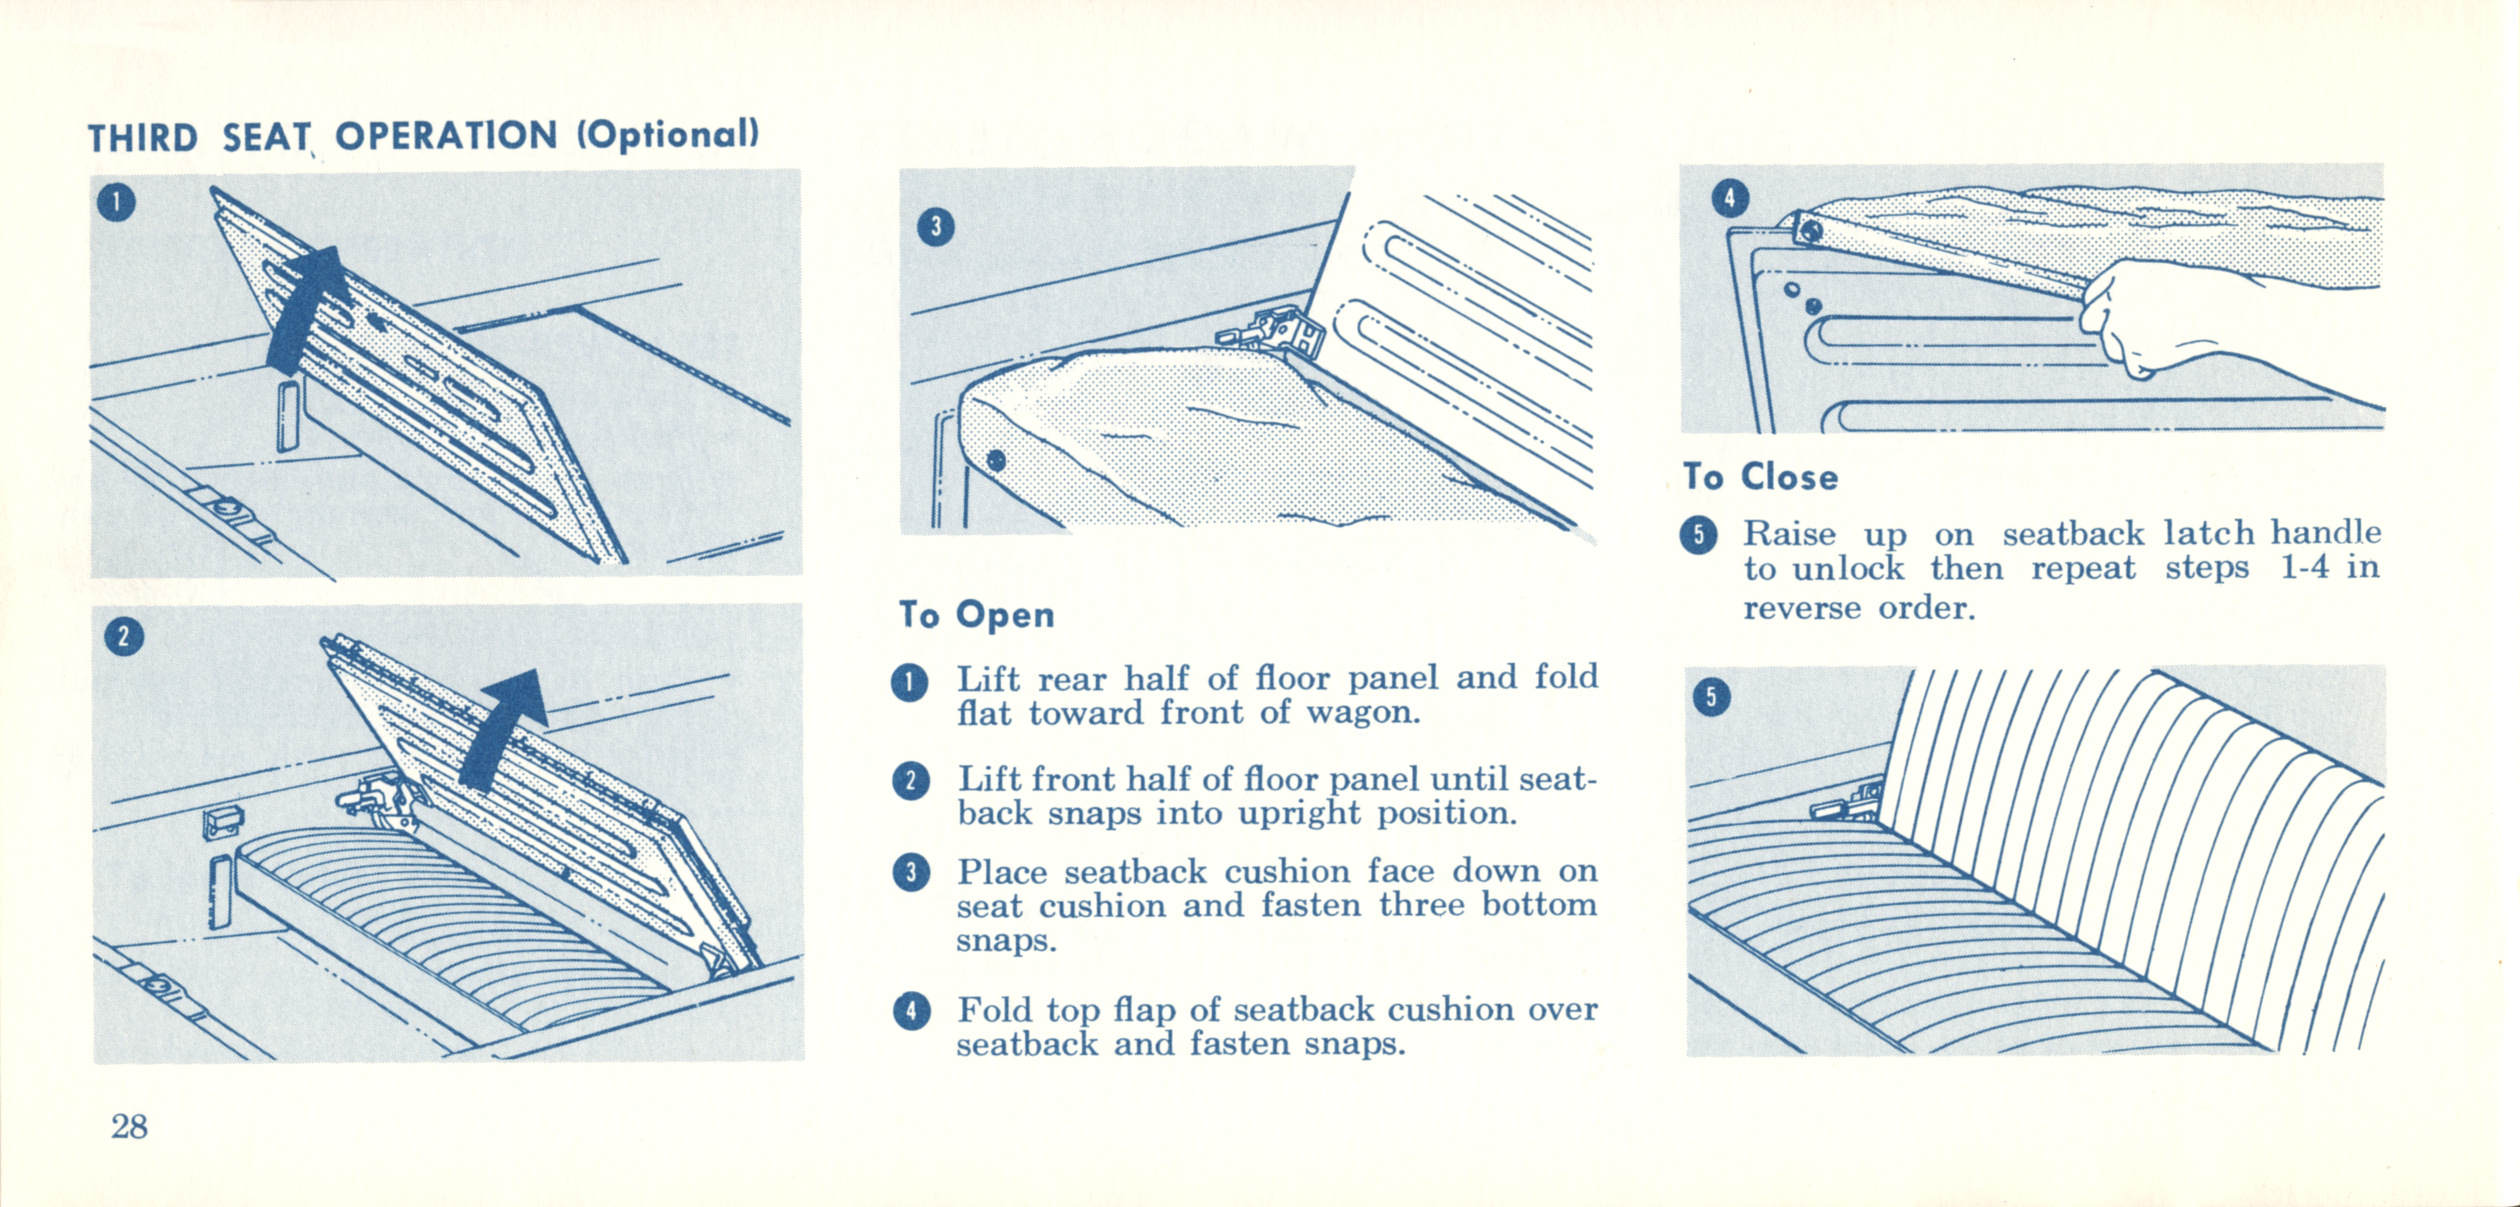 1968_Ford_Fairlane_Owners_Manual-28